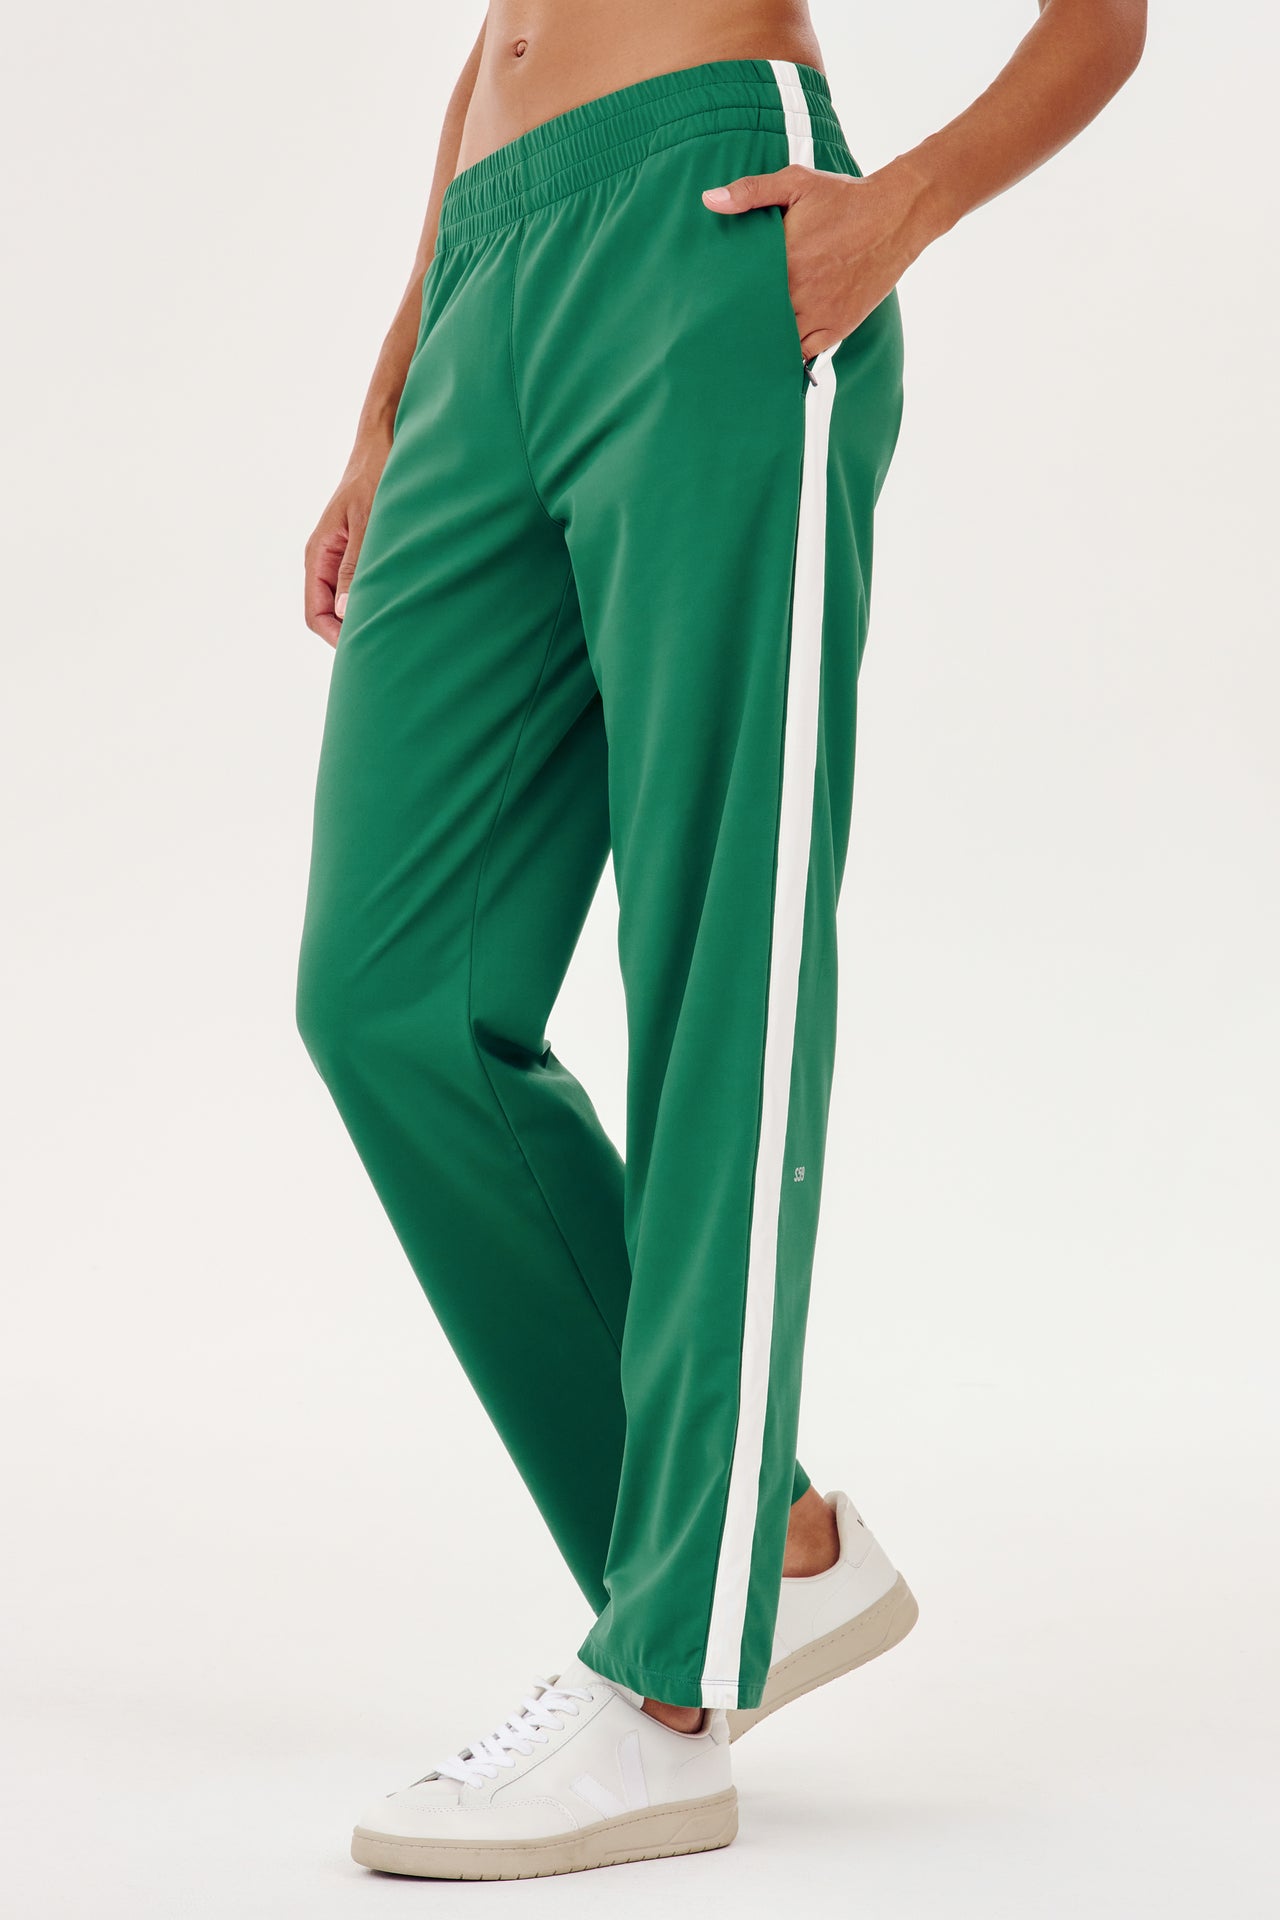 A woman wearing SPLITS59's Max Rigor Track Pant in Arugula/White designed for outdoor workouts.